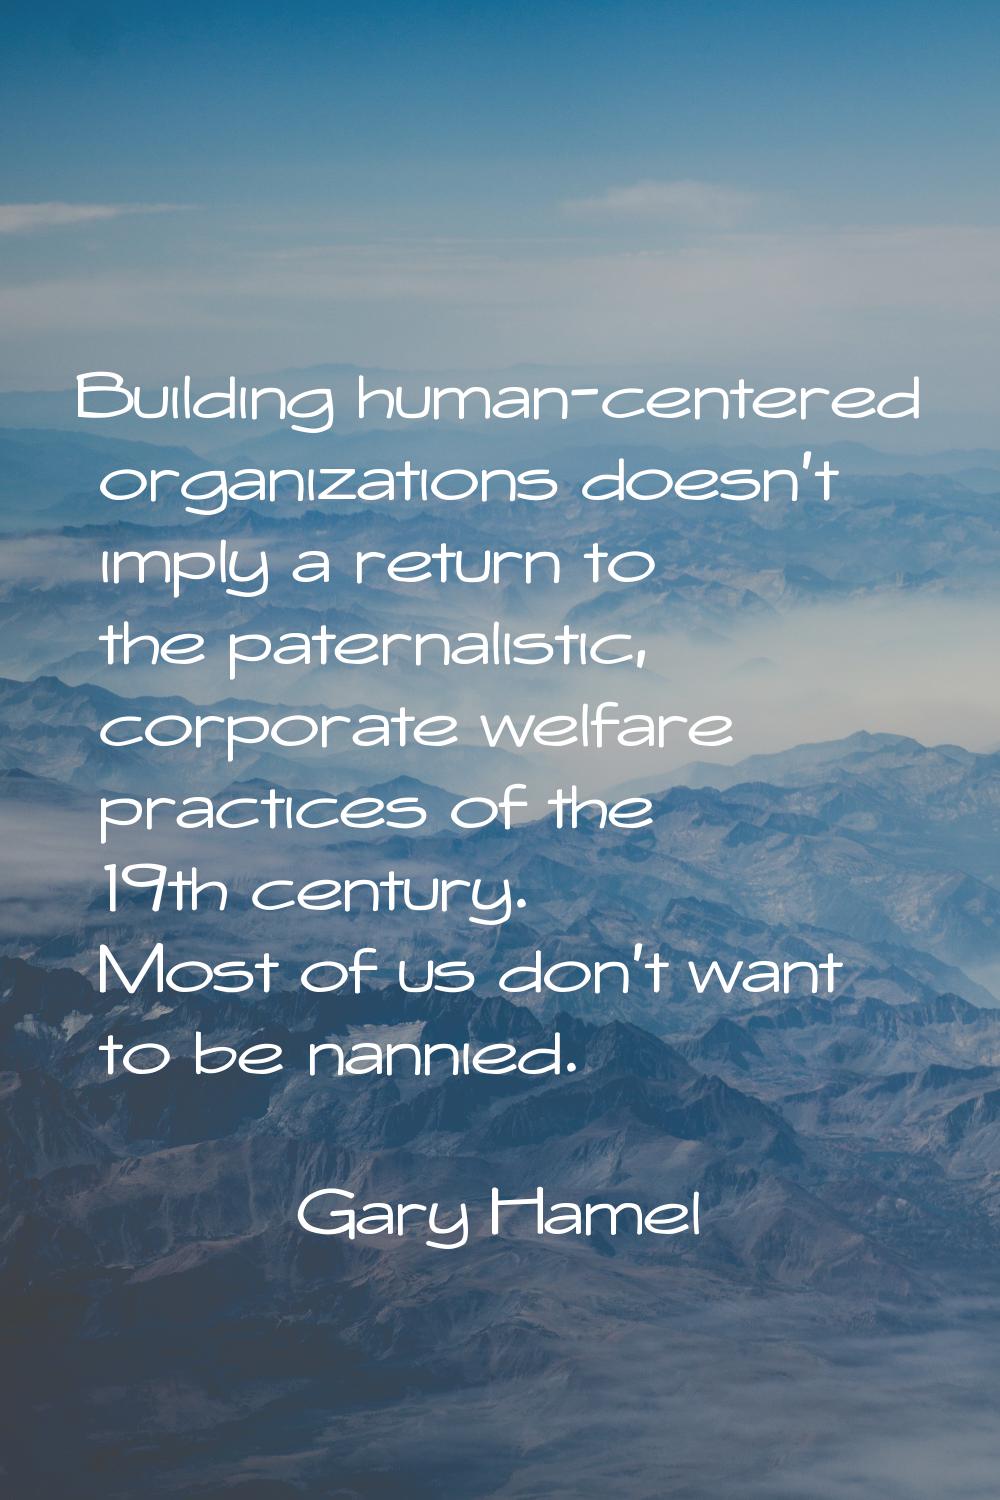 Building human-centered organizations doesn't imply a return to the paternalistic, corporate welfar